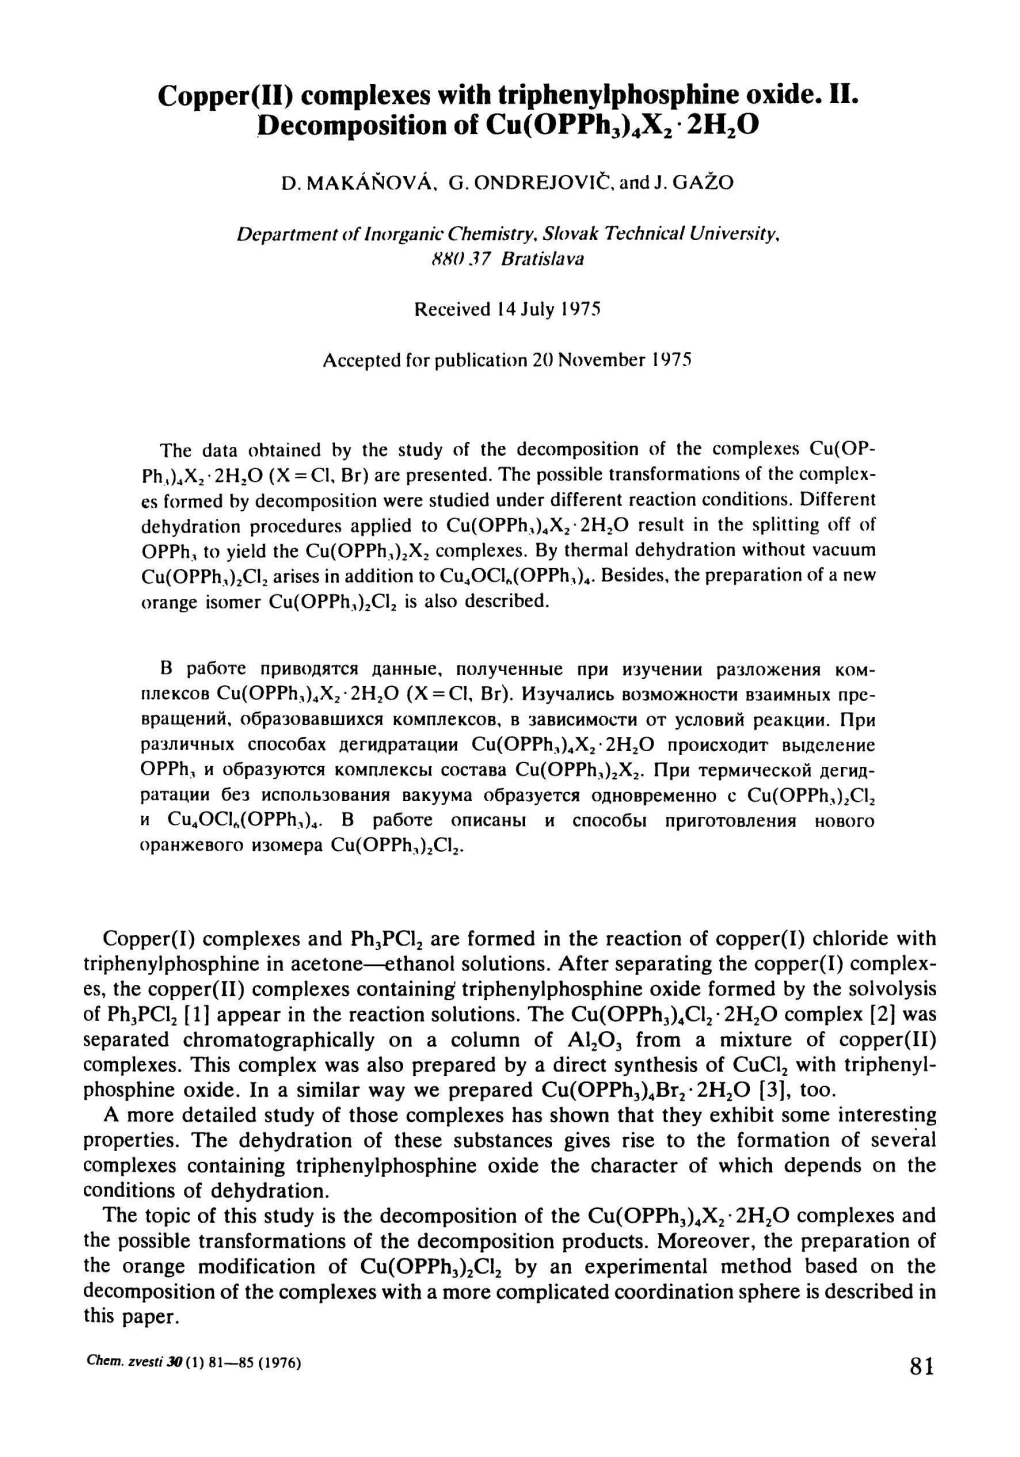 Complexes with Triphenylphosphine Oxide. II. Decomposition of Cu